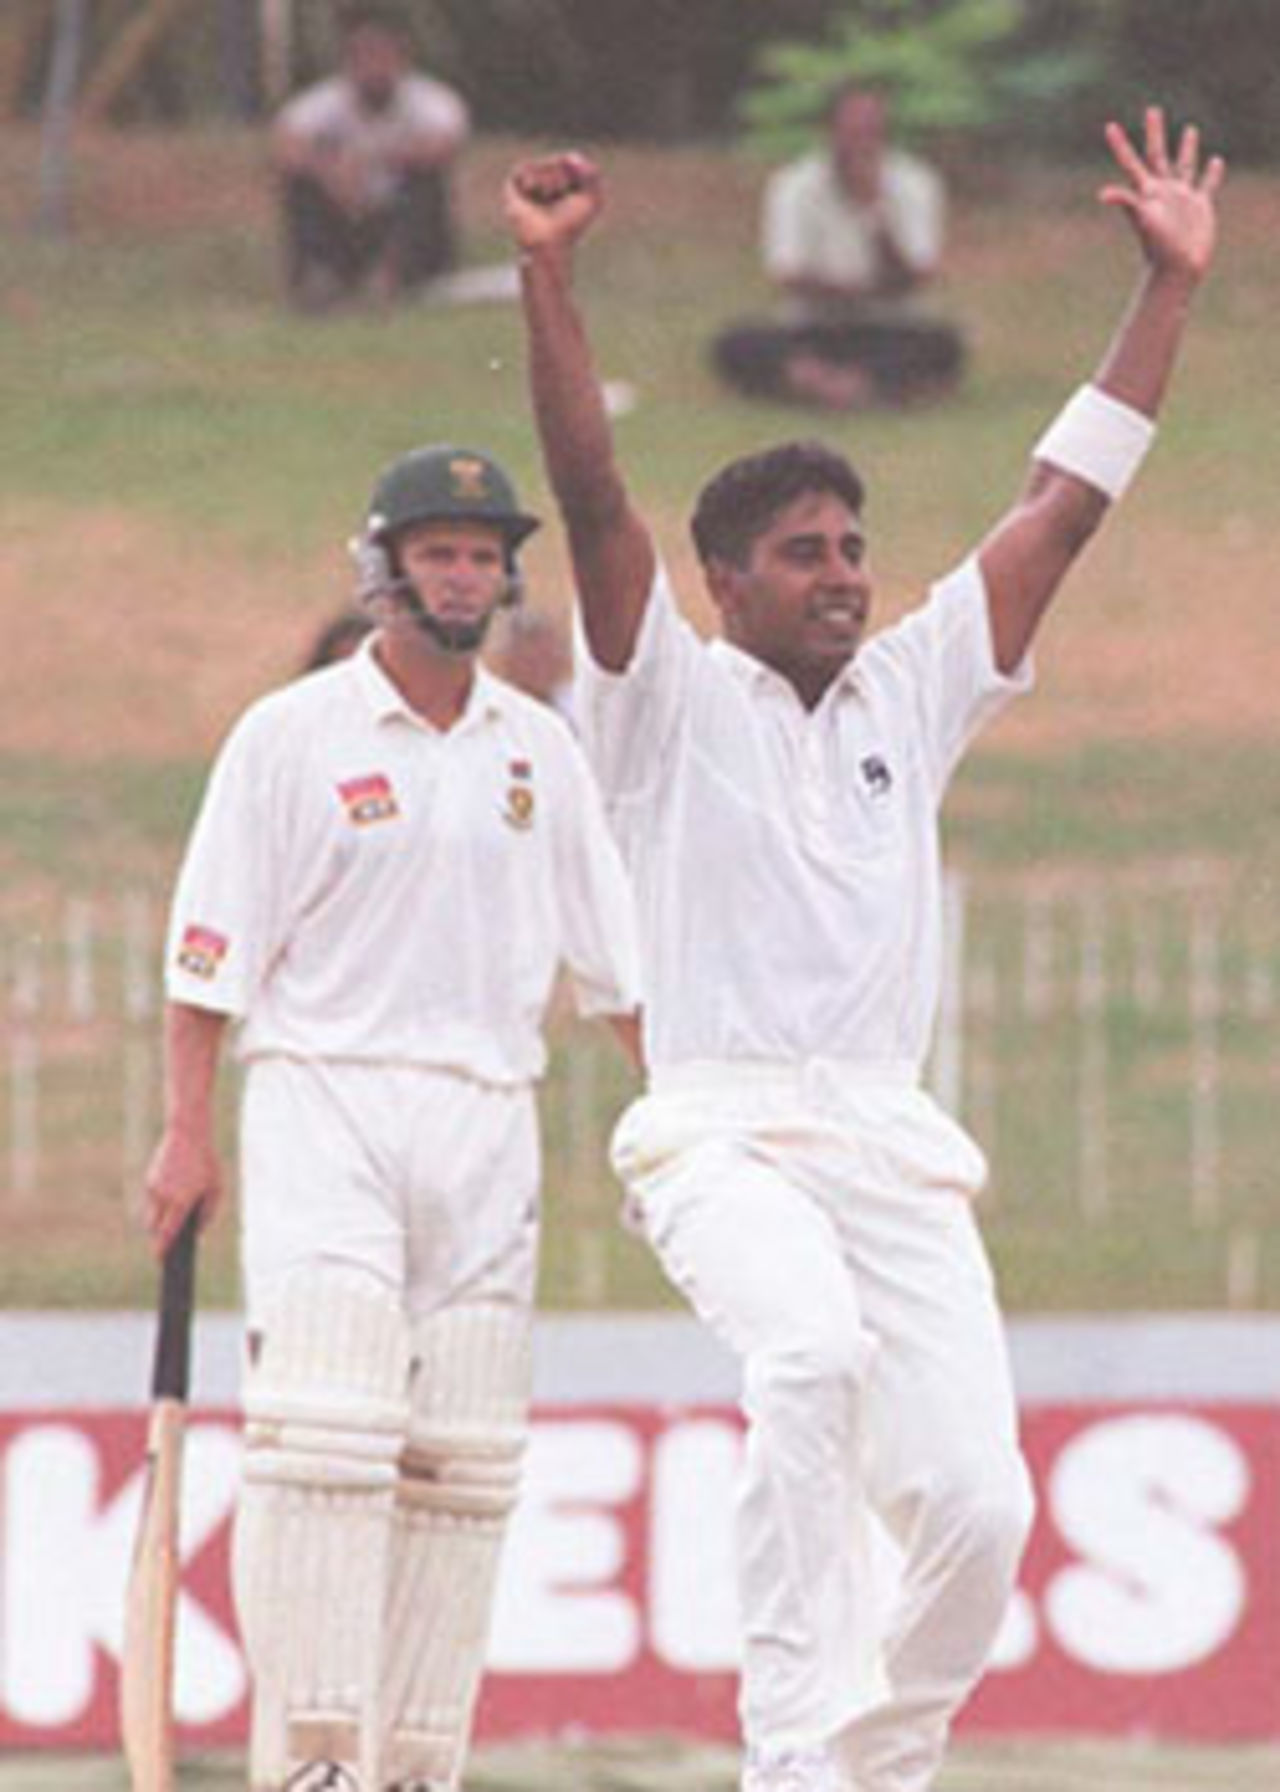 Gary Kirsten looks on as Chaminda Vaas celebrates, South Africa in Sri Lanka, 2000/01, 3rd Test, Sri Lanka v South Africa, Sinhalese Sports Club Ground, Colombo, 06-10 August 2000 (Day 1).